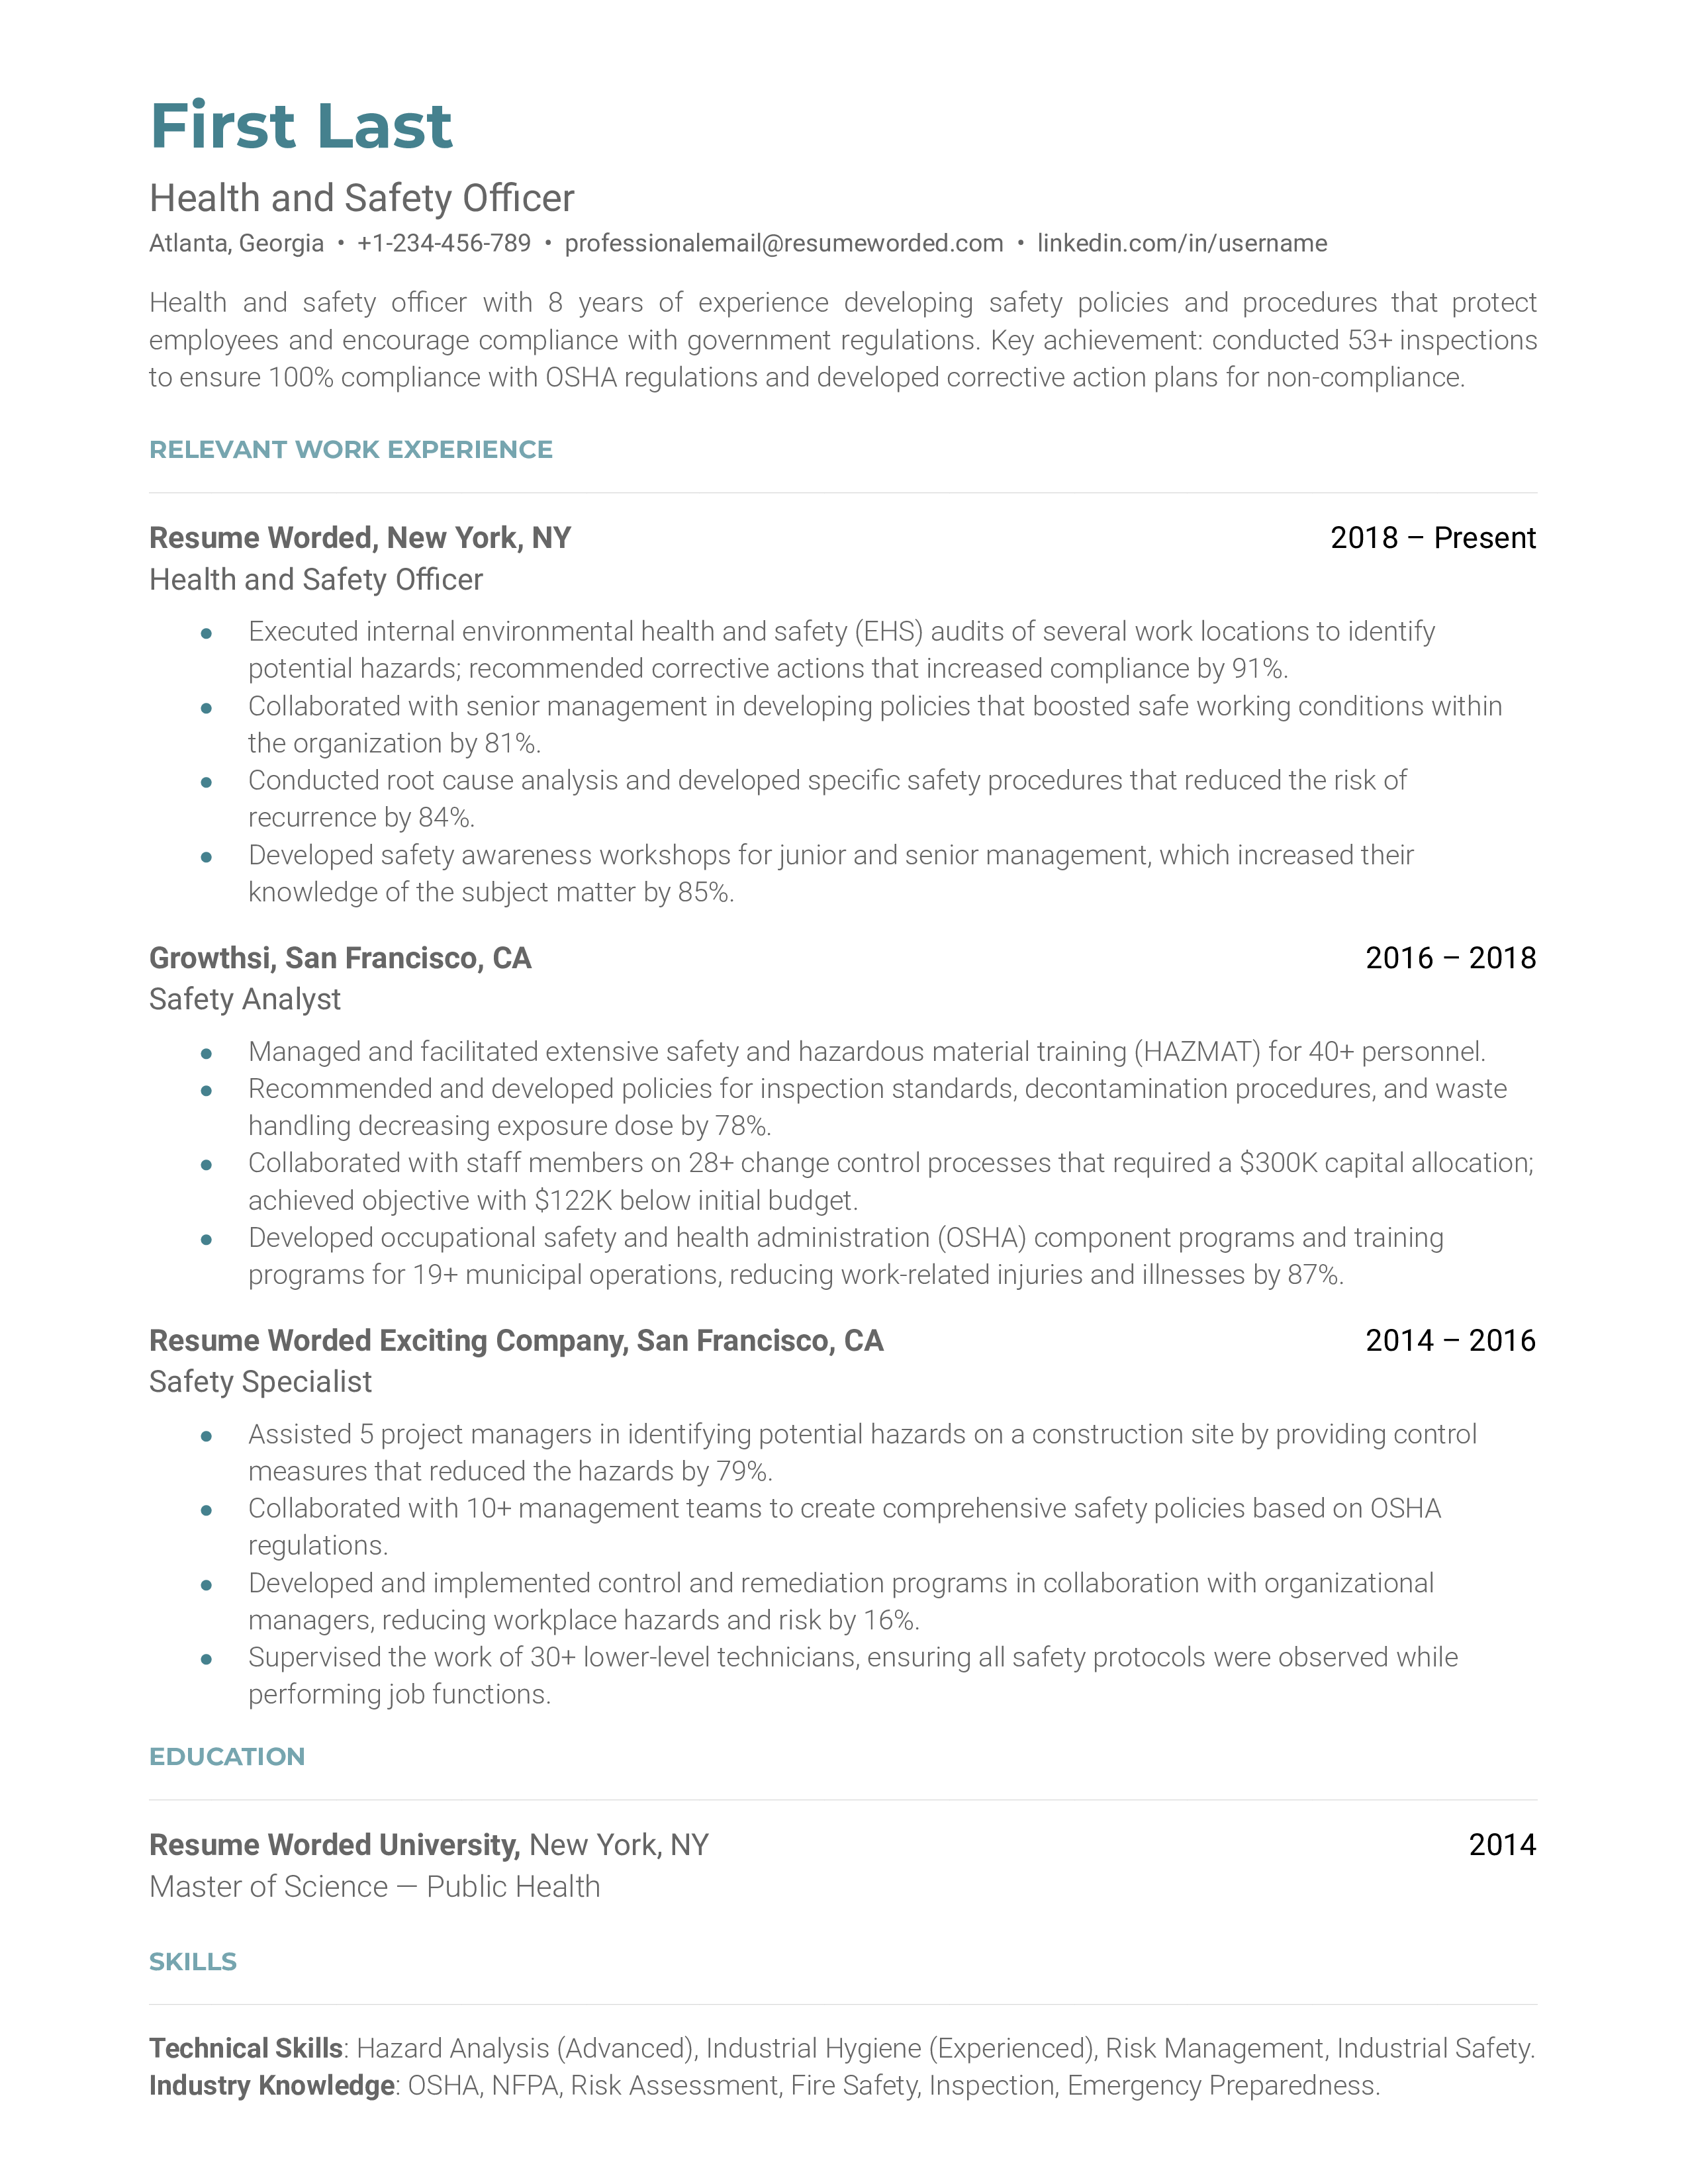 A health and safety officer resume template using strong metrics. 